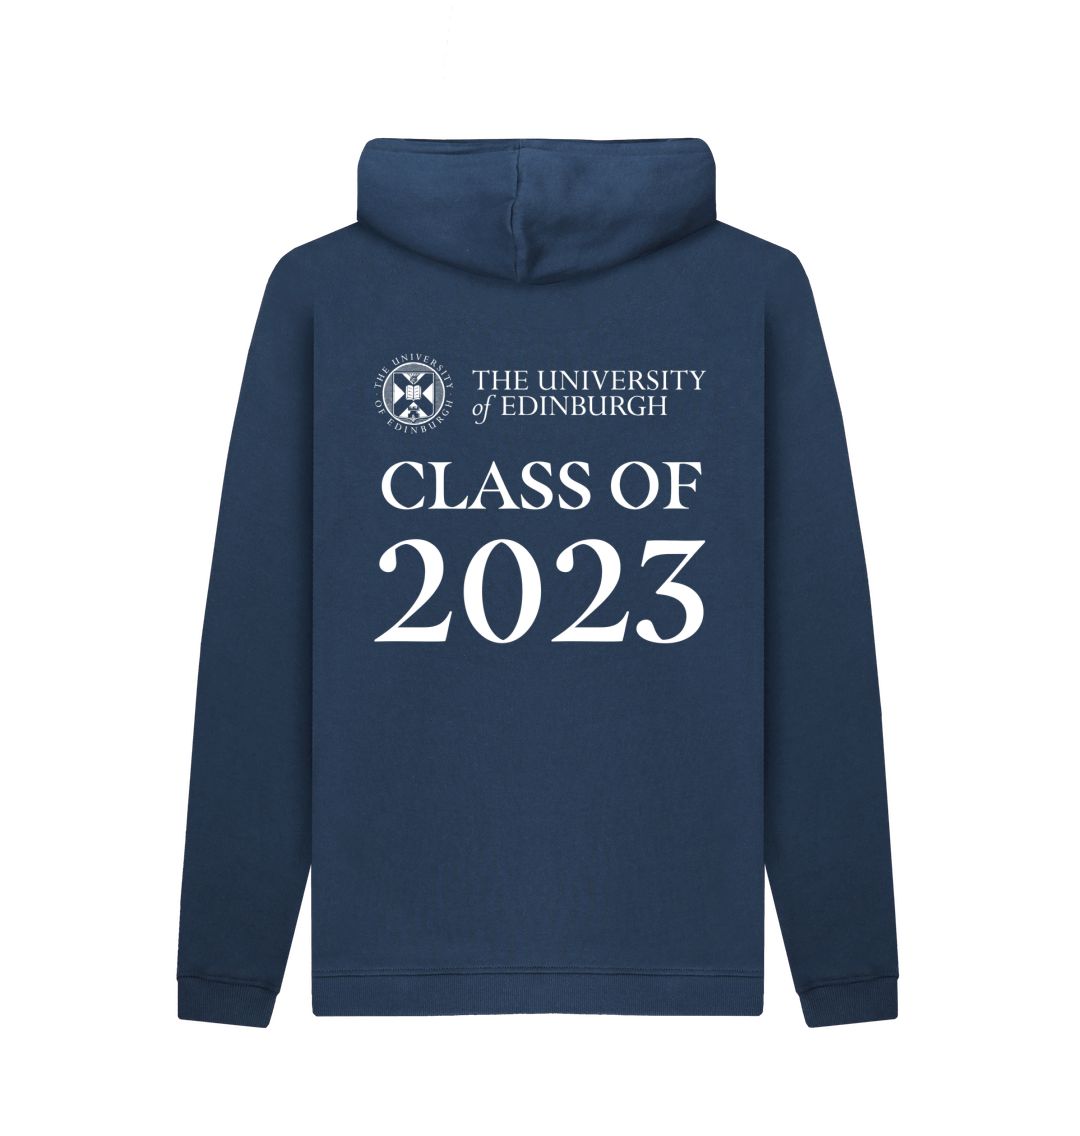 Back of Navy Class of 2023 Hoodie.